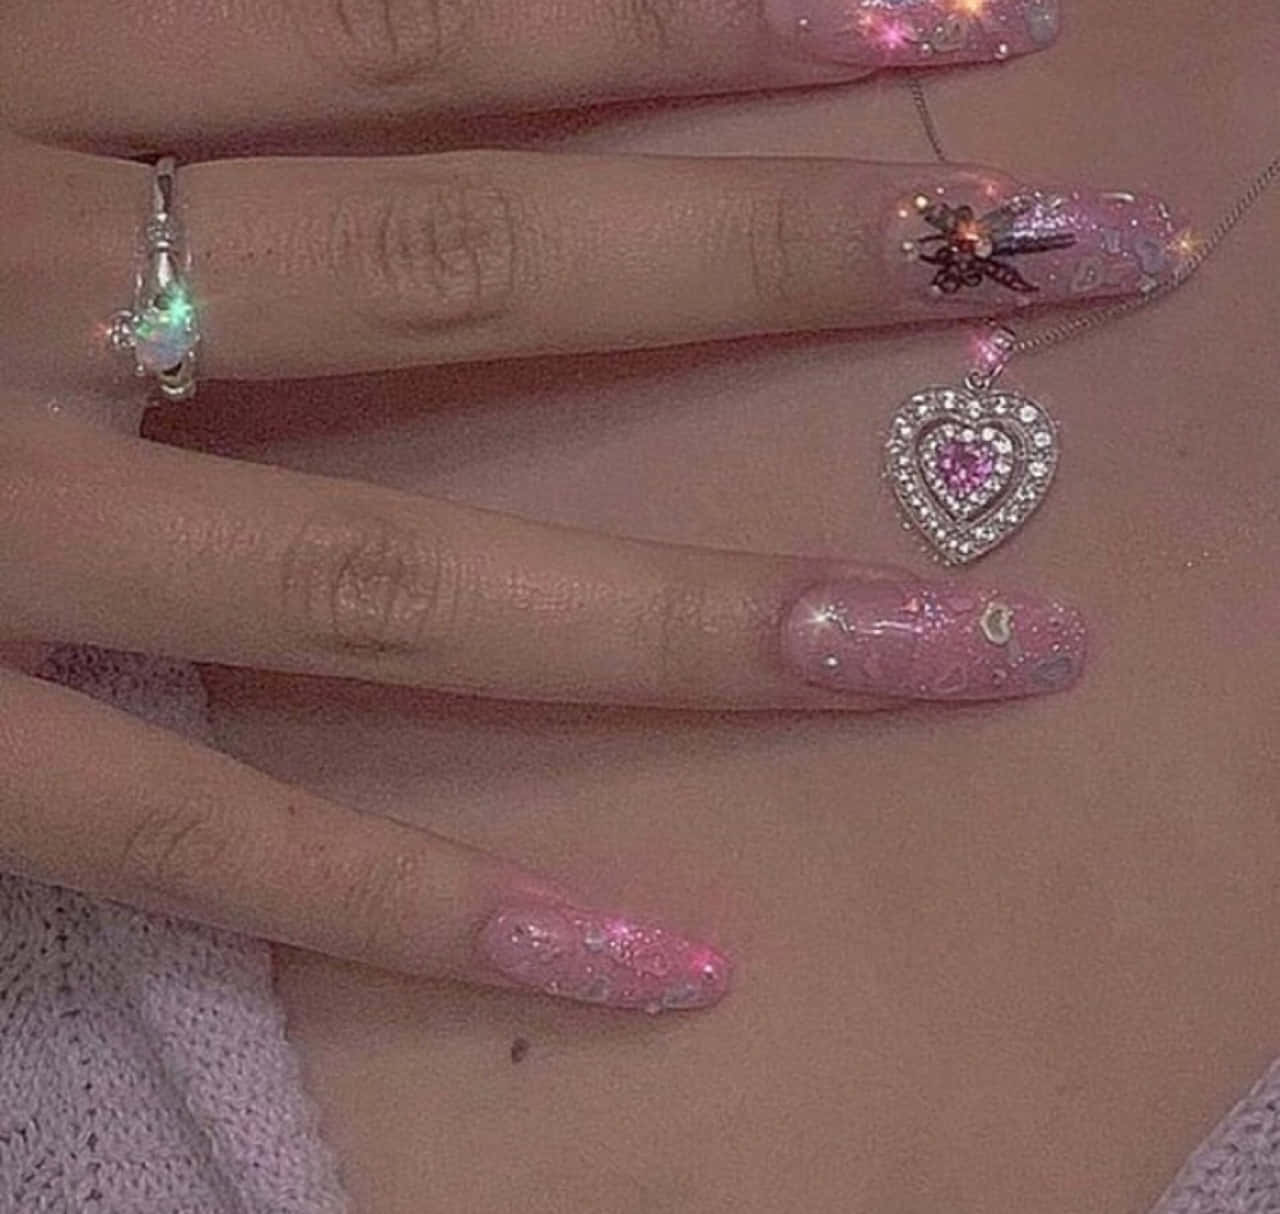 A woman's hands with long, pointed nails painted in pink glitter - Nails